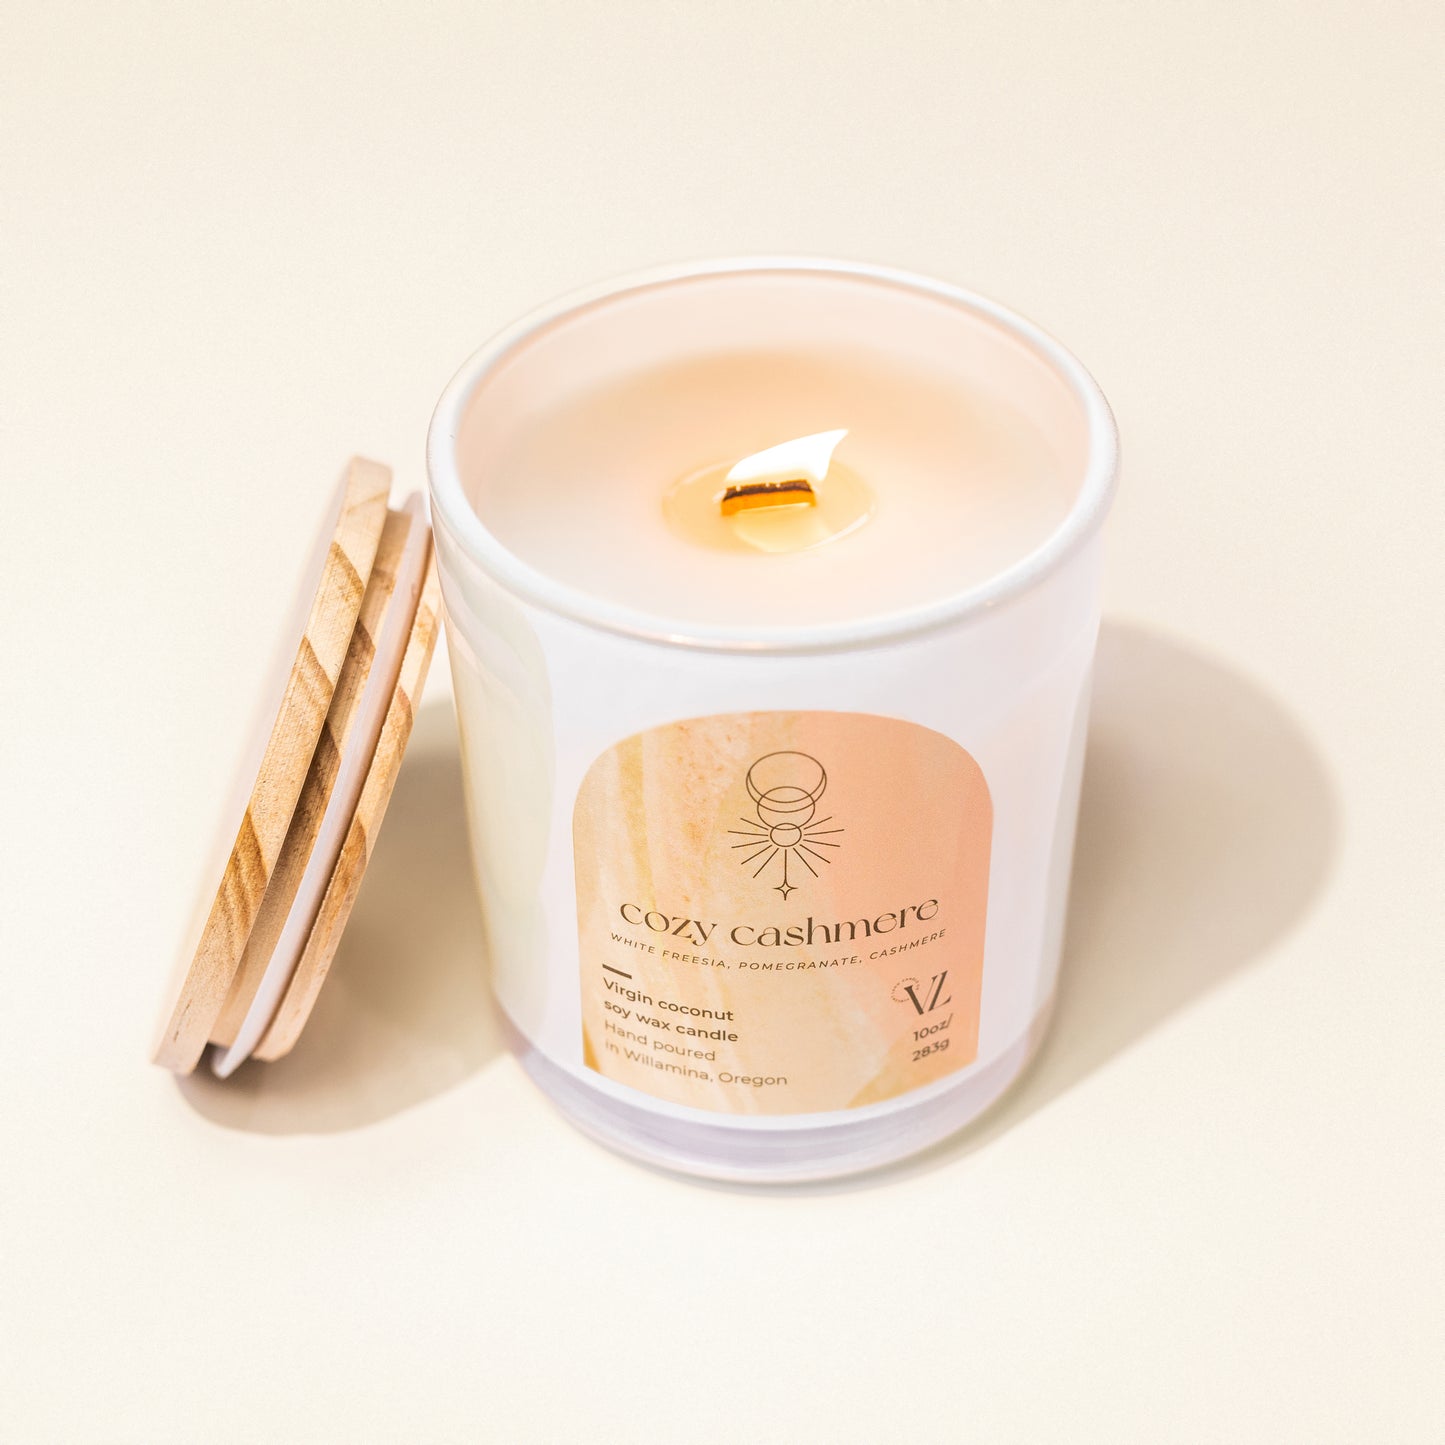 Cozy cashmere coconut soy wax candle | white freesia, pomegranate, cashmere